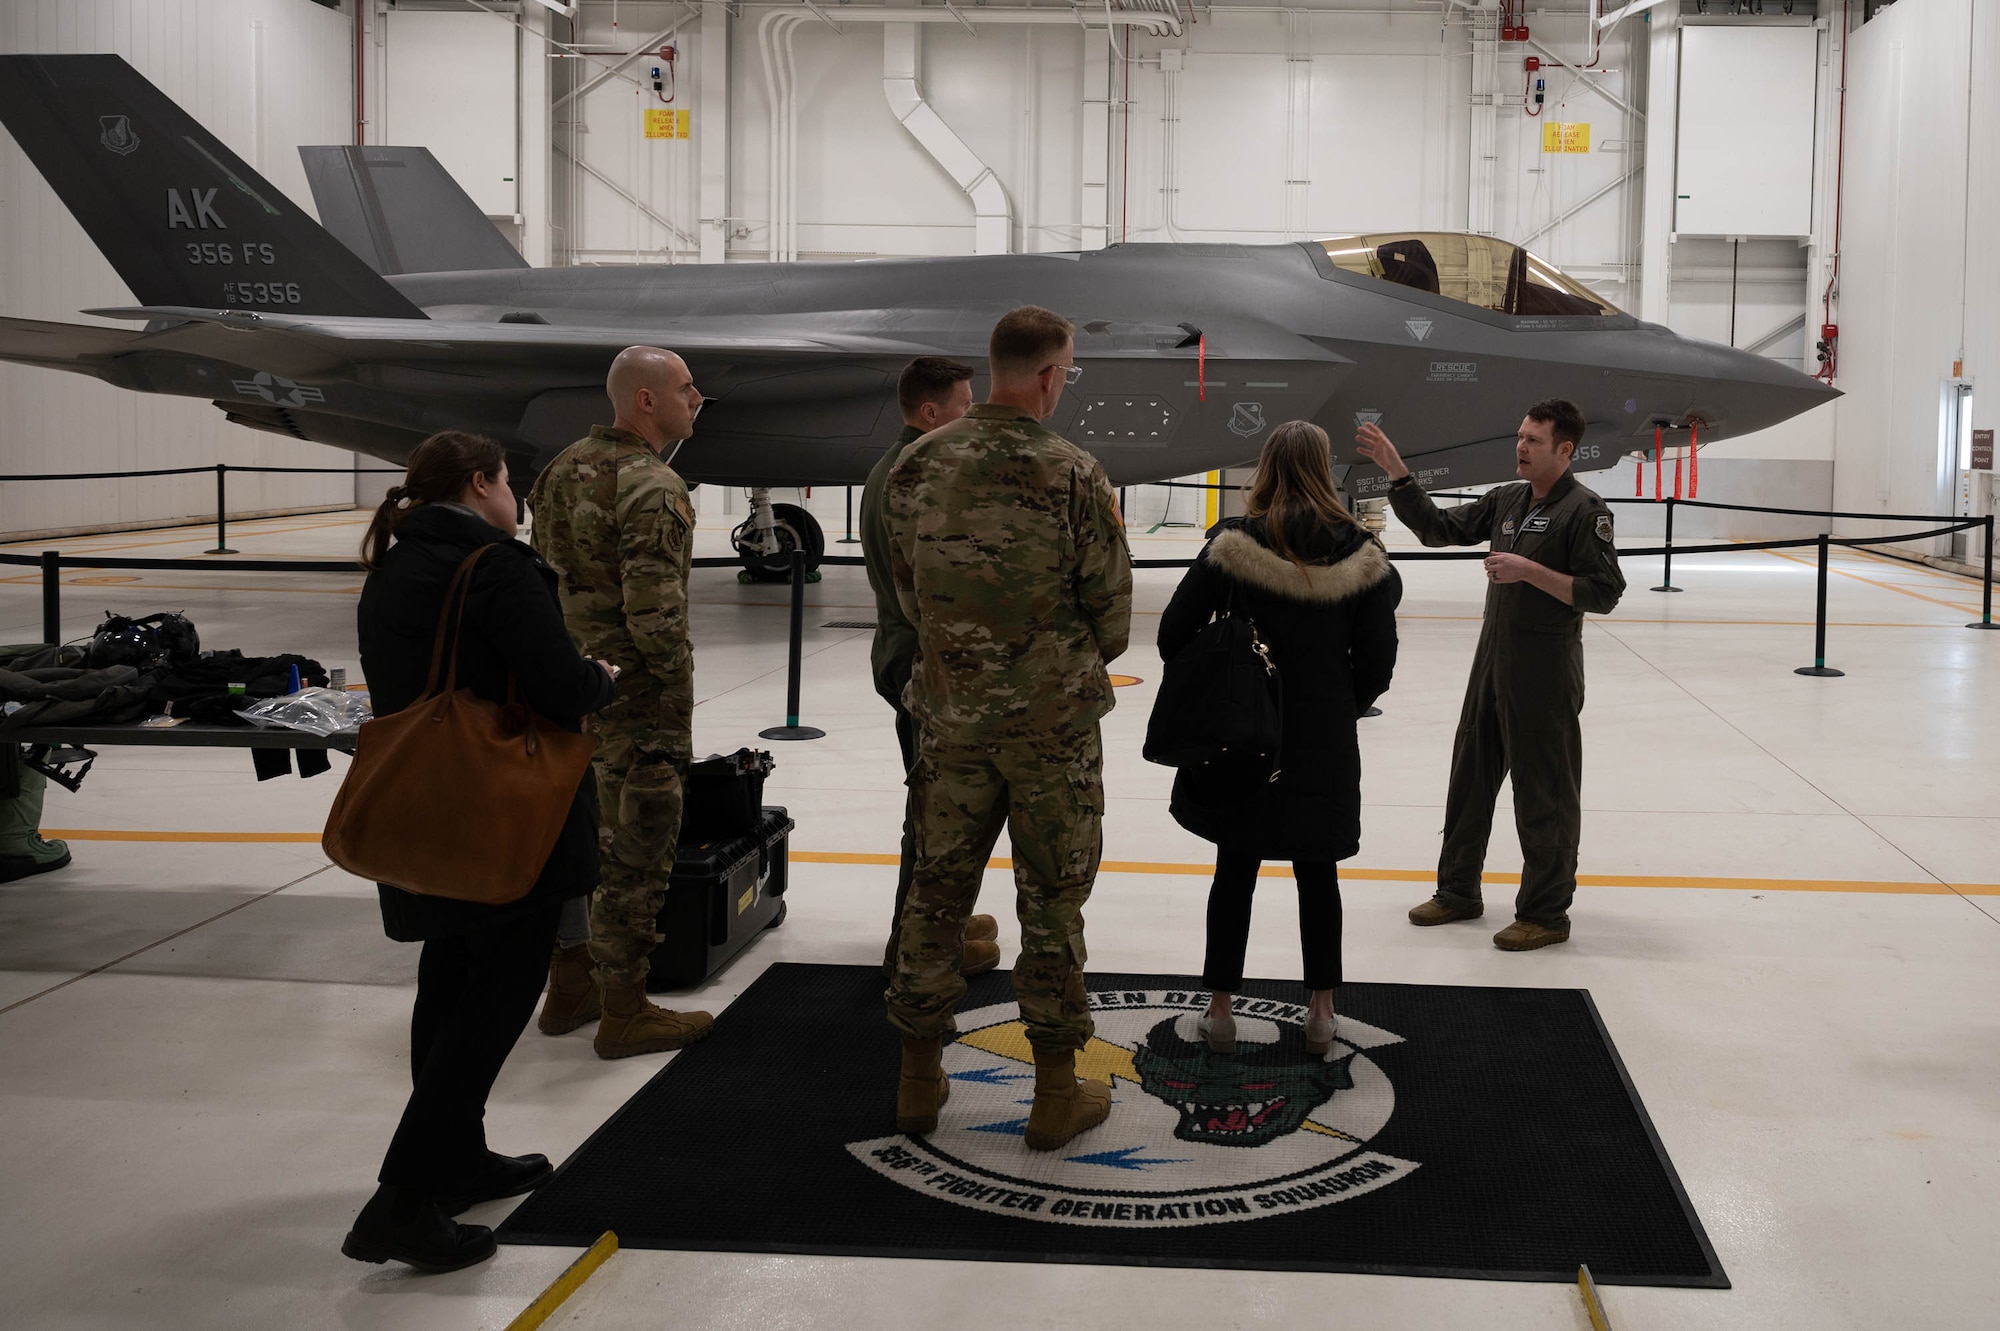 A photo during a briefing about F-35A Lighting II capabilities.